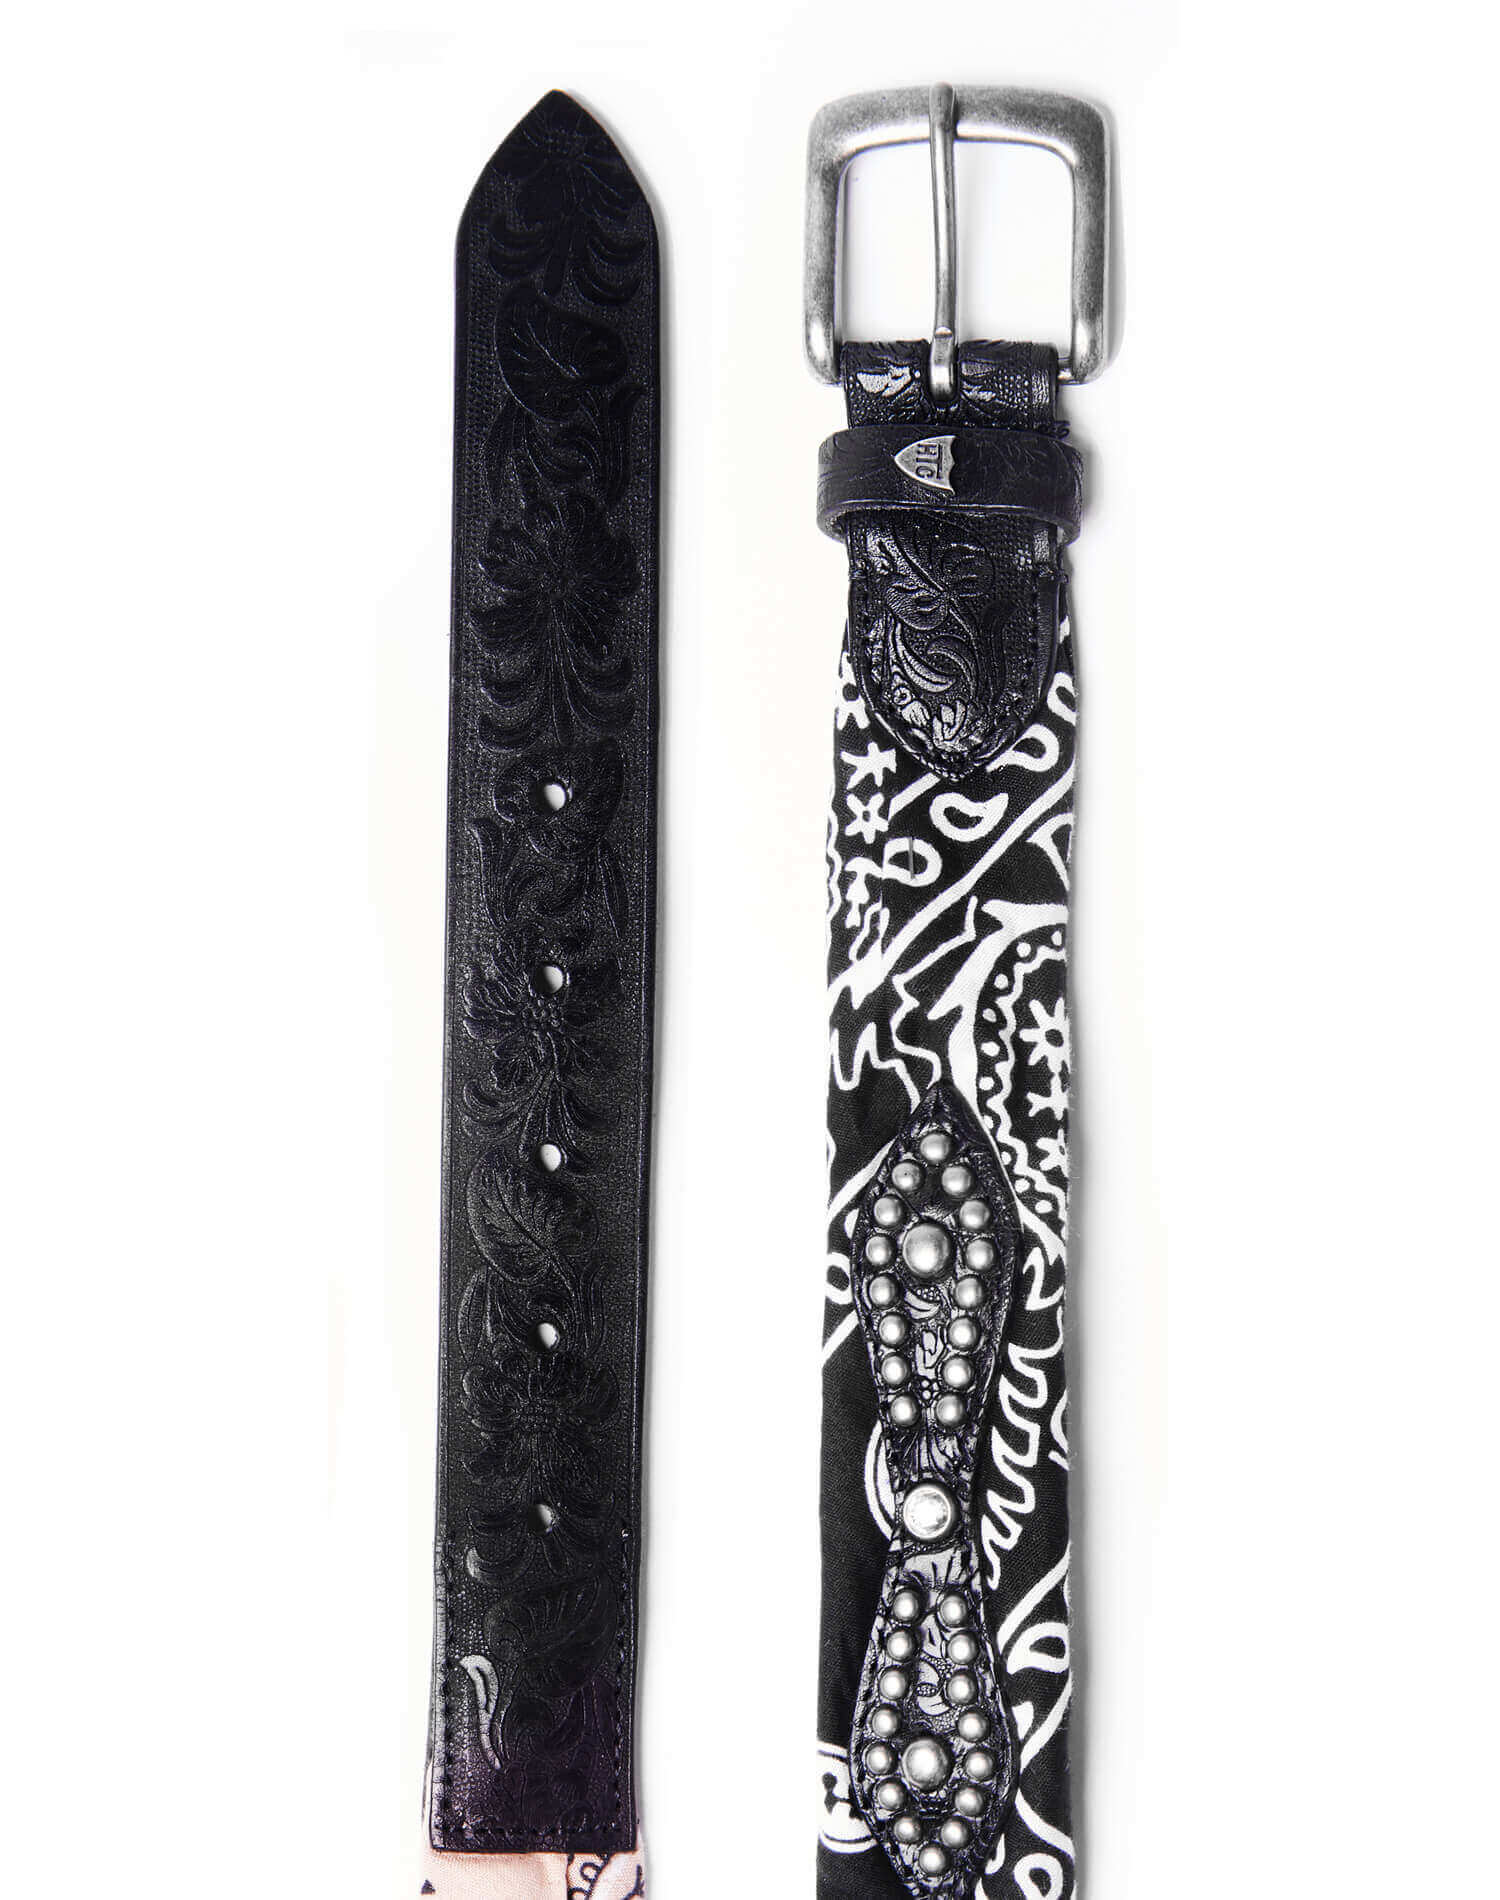 BANDANA BELT Black carved leather belt, paisley black and beige bandanas with studs and leather details. Height: 3,5 cm. Made in Italy. HTC LOS ANGELES